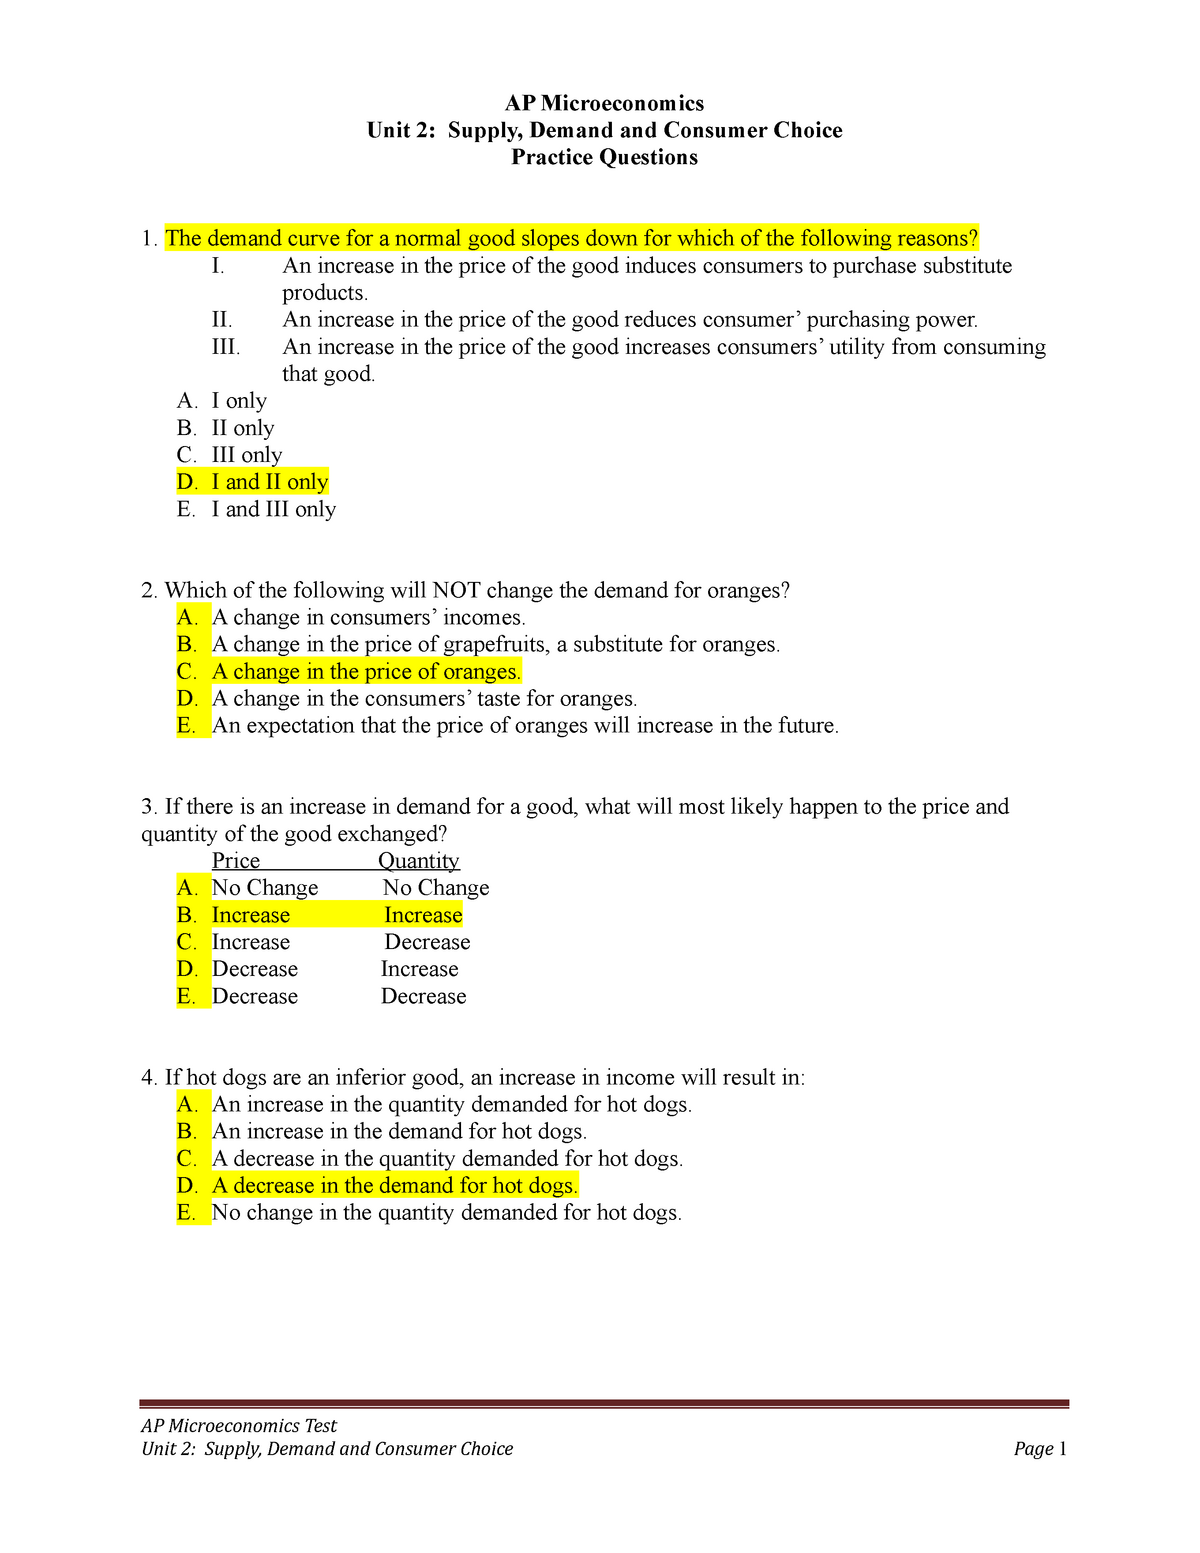 microeconomics assignment questions and answers